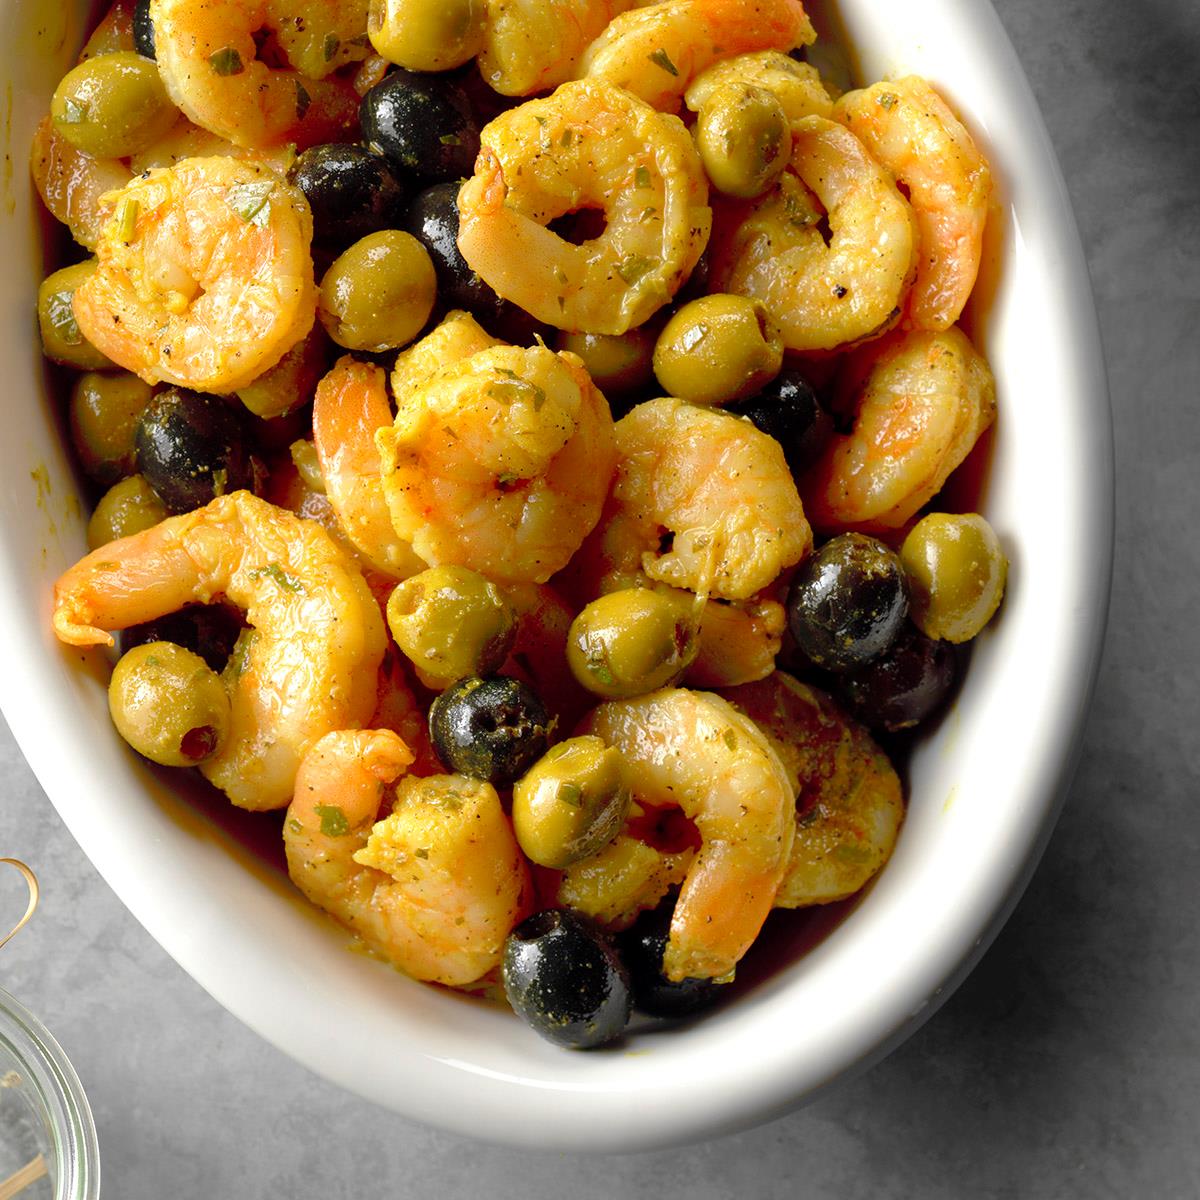 Marinated Shrimp Recipe - Lately, my son and i have been watching ...